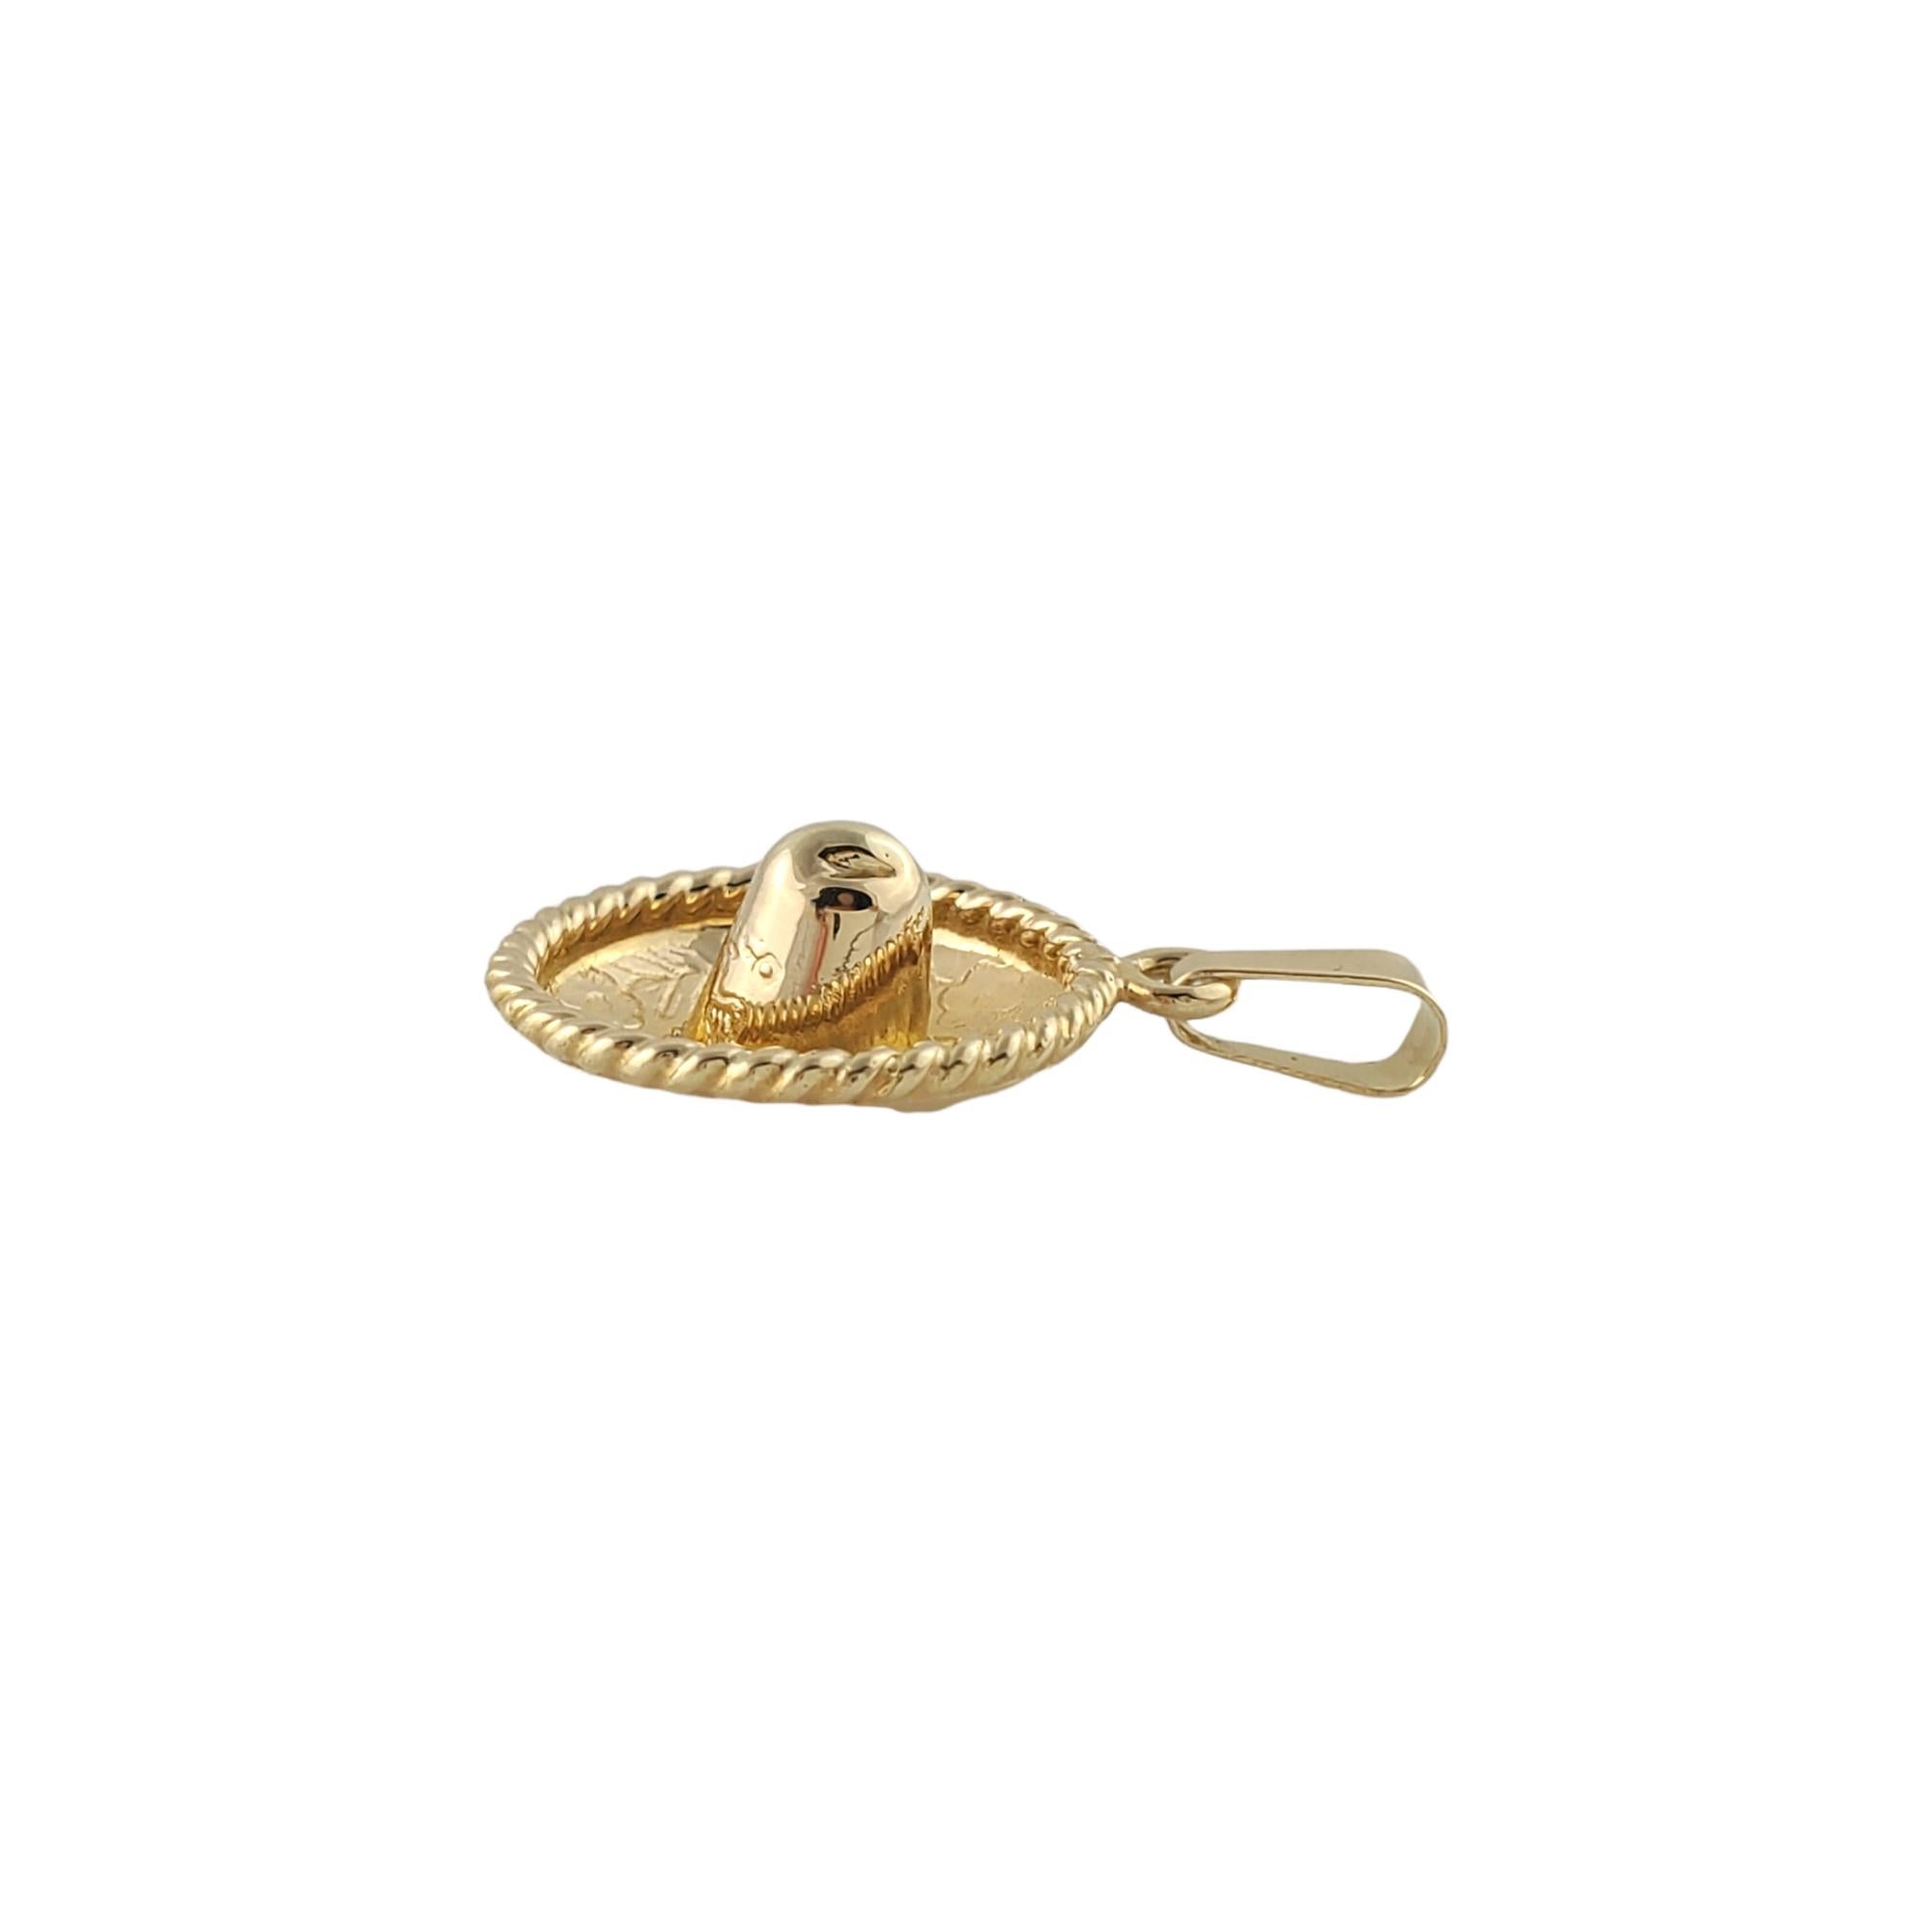 Vintage 14K Yellow Gold Sombrero Charm

Intricately detailed 14K yellow gold sombrero charm featuring a flower design around the top of the hat.

Size: 20 mm X 17 mm

Weight: 2.6 g/ 1.6 dwt

Hallmark: MC 177 14K

Very good condition, professionally